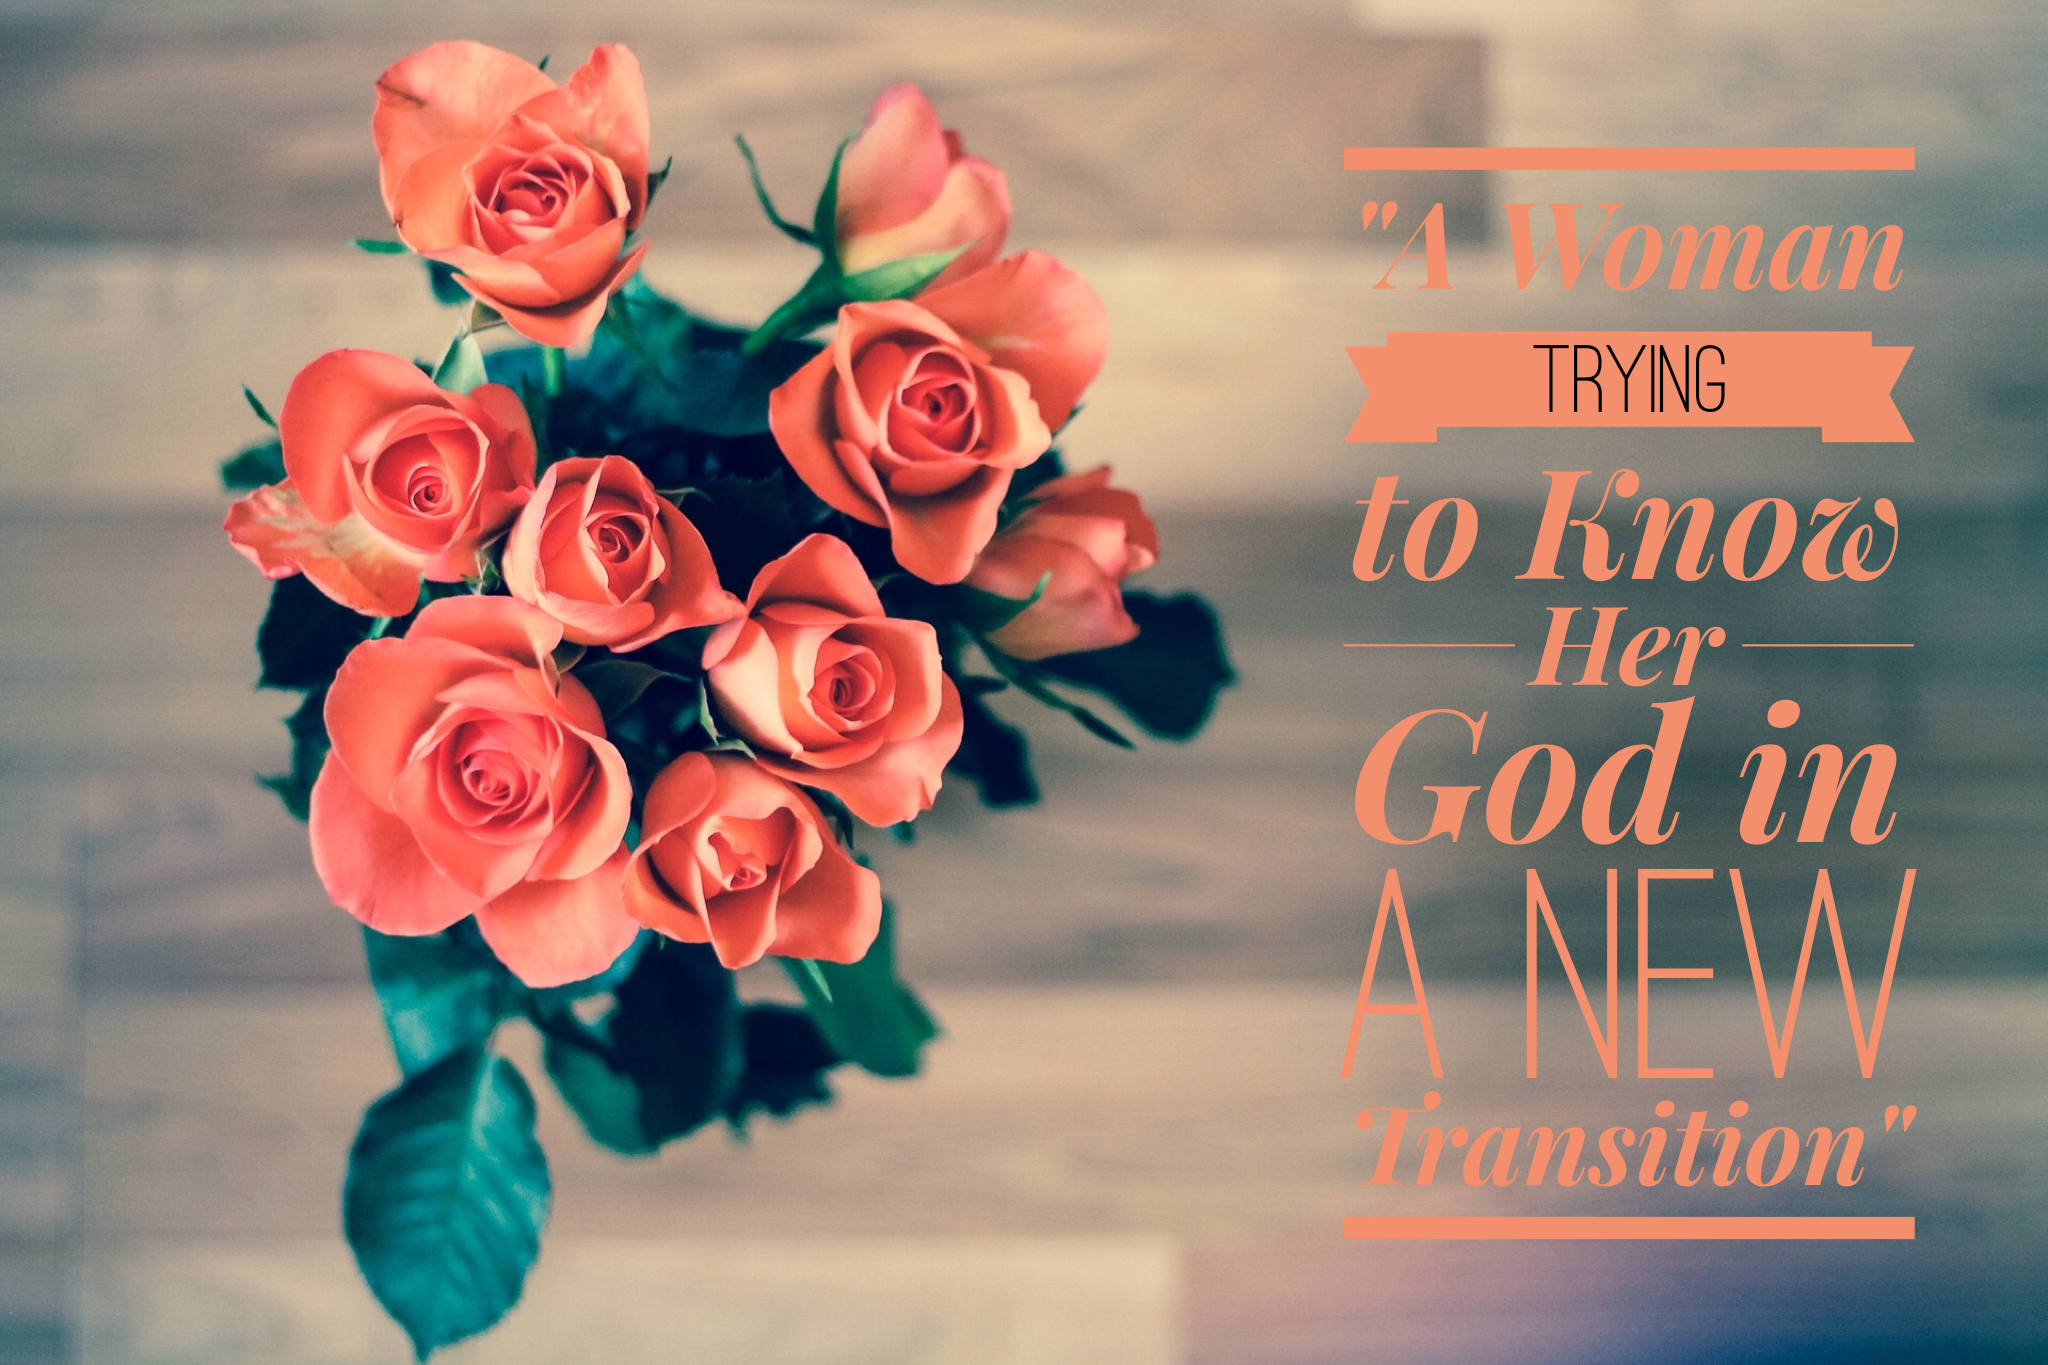 A Woman Seeking to Know Her God in a New Transition | www.codyandras.com/blog/2017/8/11/a-woman-seeking-to-know-her-god-in-a-new-transition